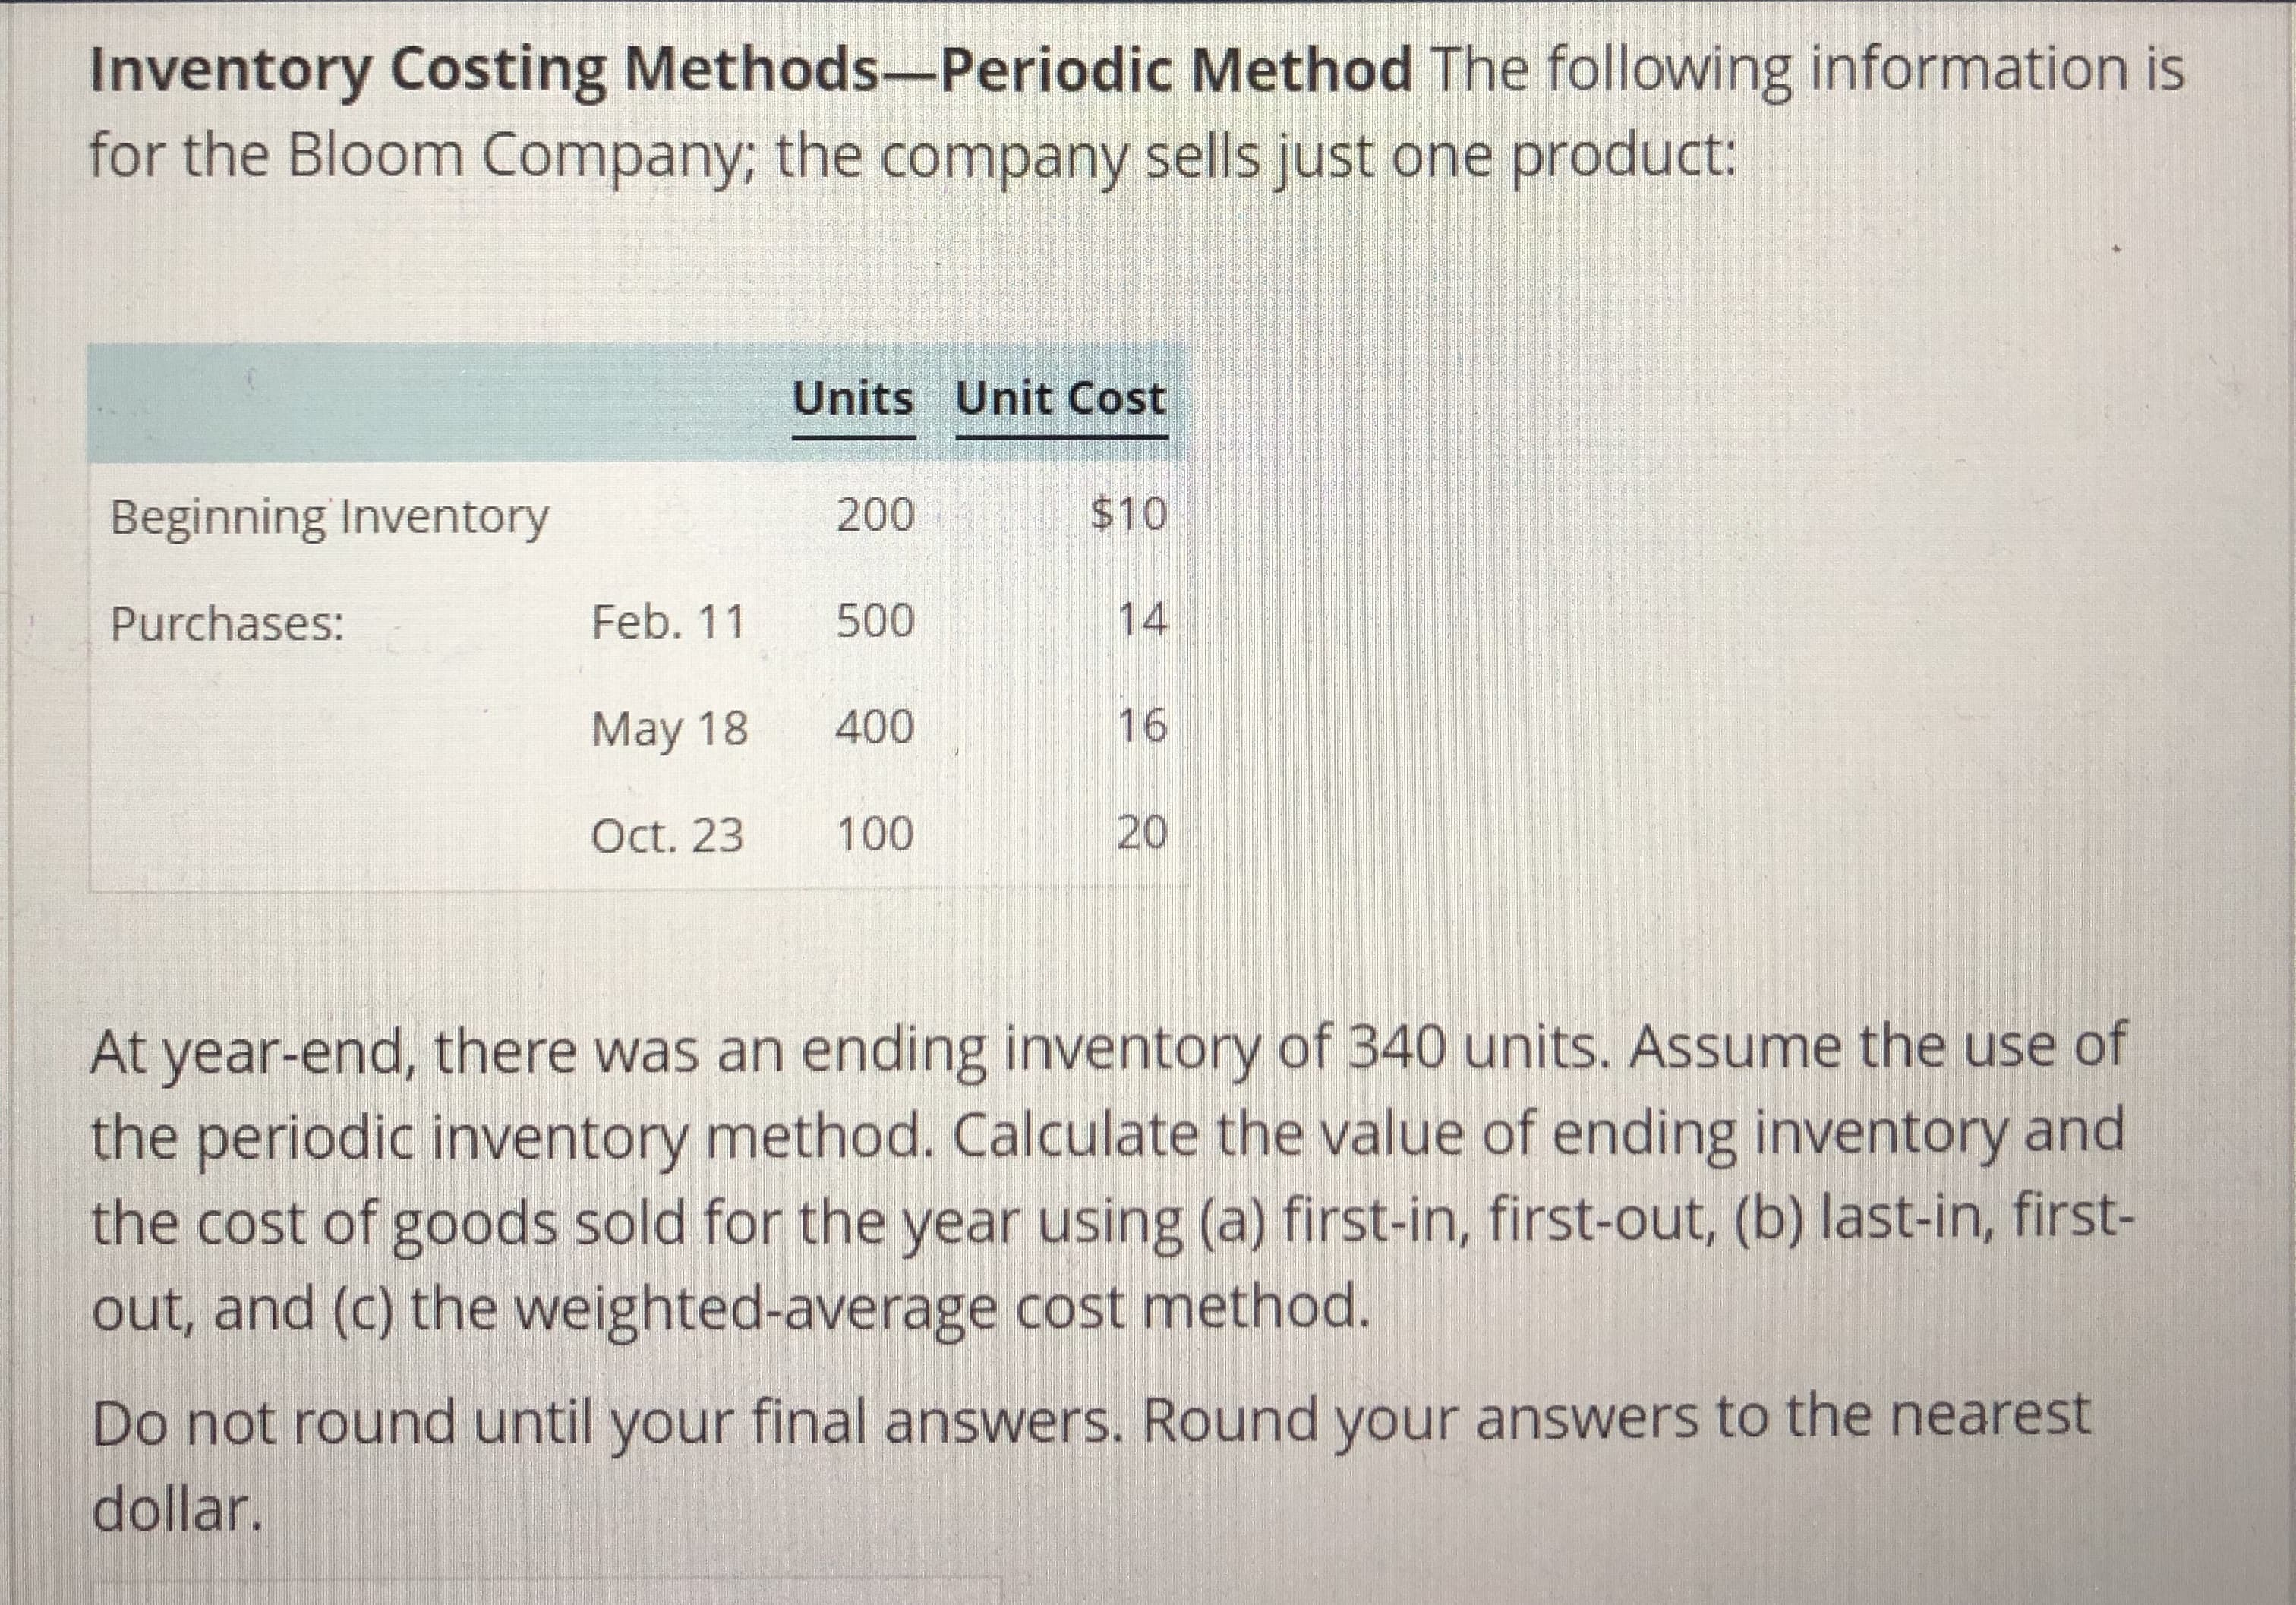 Inventory Costing Methods-Periodic Method The following information is
for the Bloom Company; the company sells just one product:
200
Feb. 11 500
May 18 400
Oct. 23 100
Units Unit Cost
$10
14
16
20
Beginning Inventory
Purchases:
At year-end, there was an ending inventory of 340 units. Assume the use of
the periodic inventory method. Calculate the value of ending inventory and
the cost of goods sold for the year using (a) first-in, first-out, (b) last-in, first-
out, and (c) the weighted-average cost method.
Do not round until your final answers. Round your answers to the nearest
dollar.
